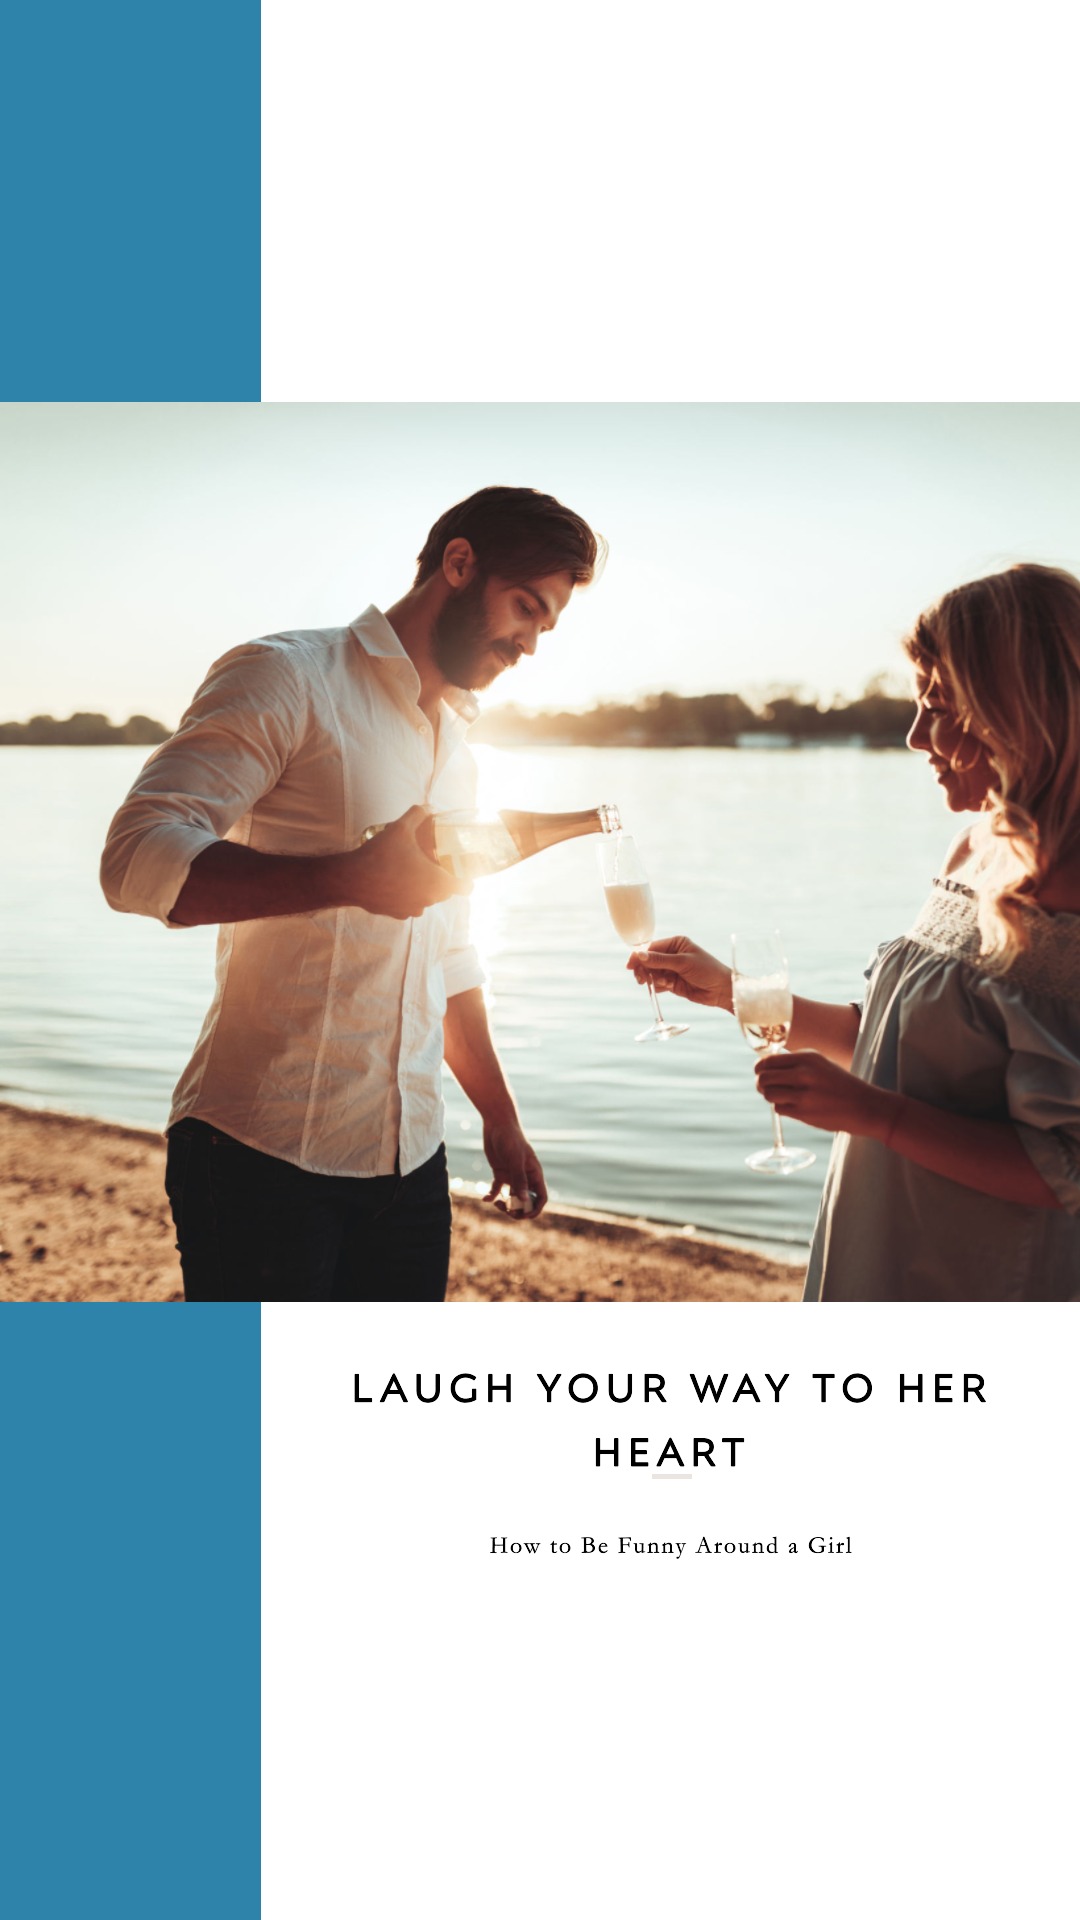 Laugh Your Way to Her Heart How to Be Funny Around a Girl